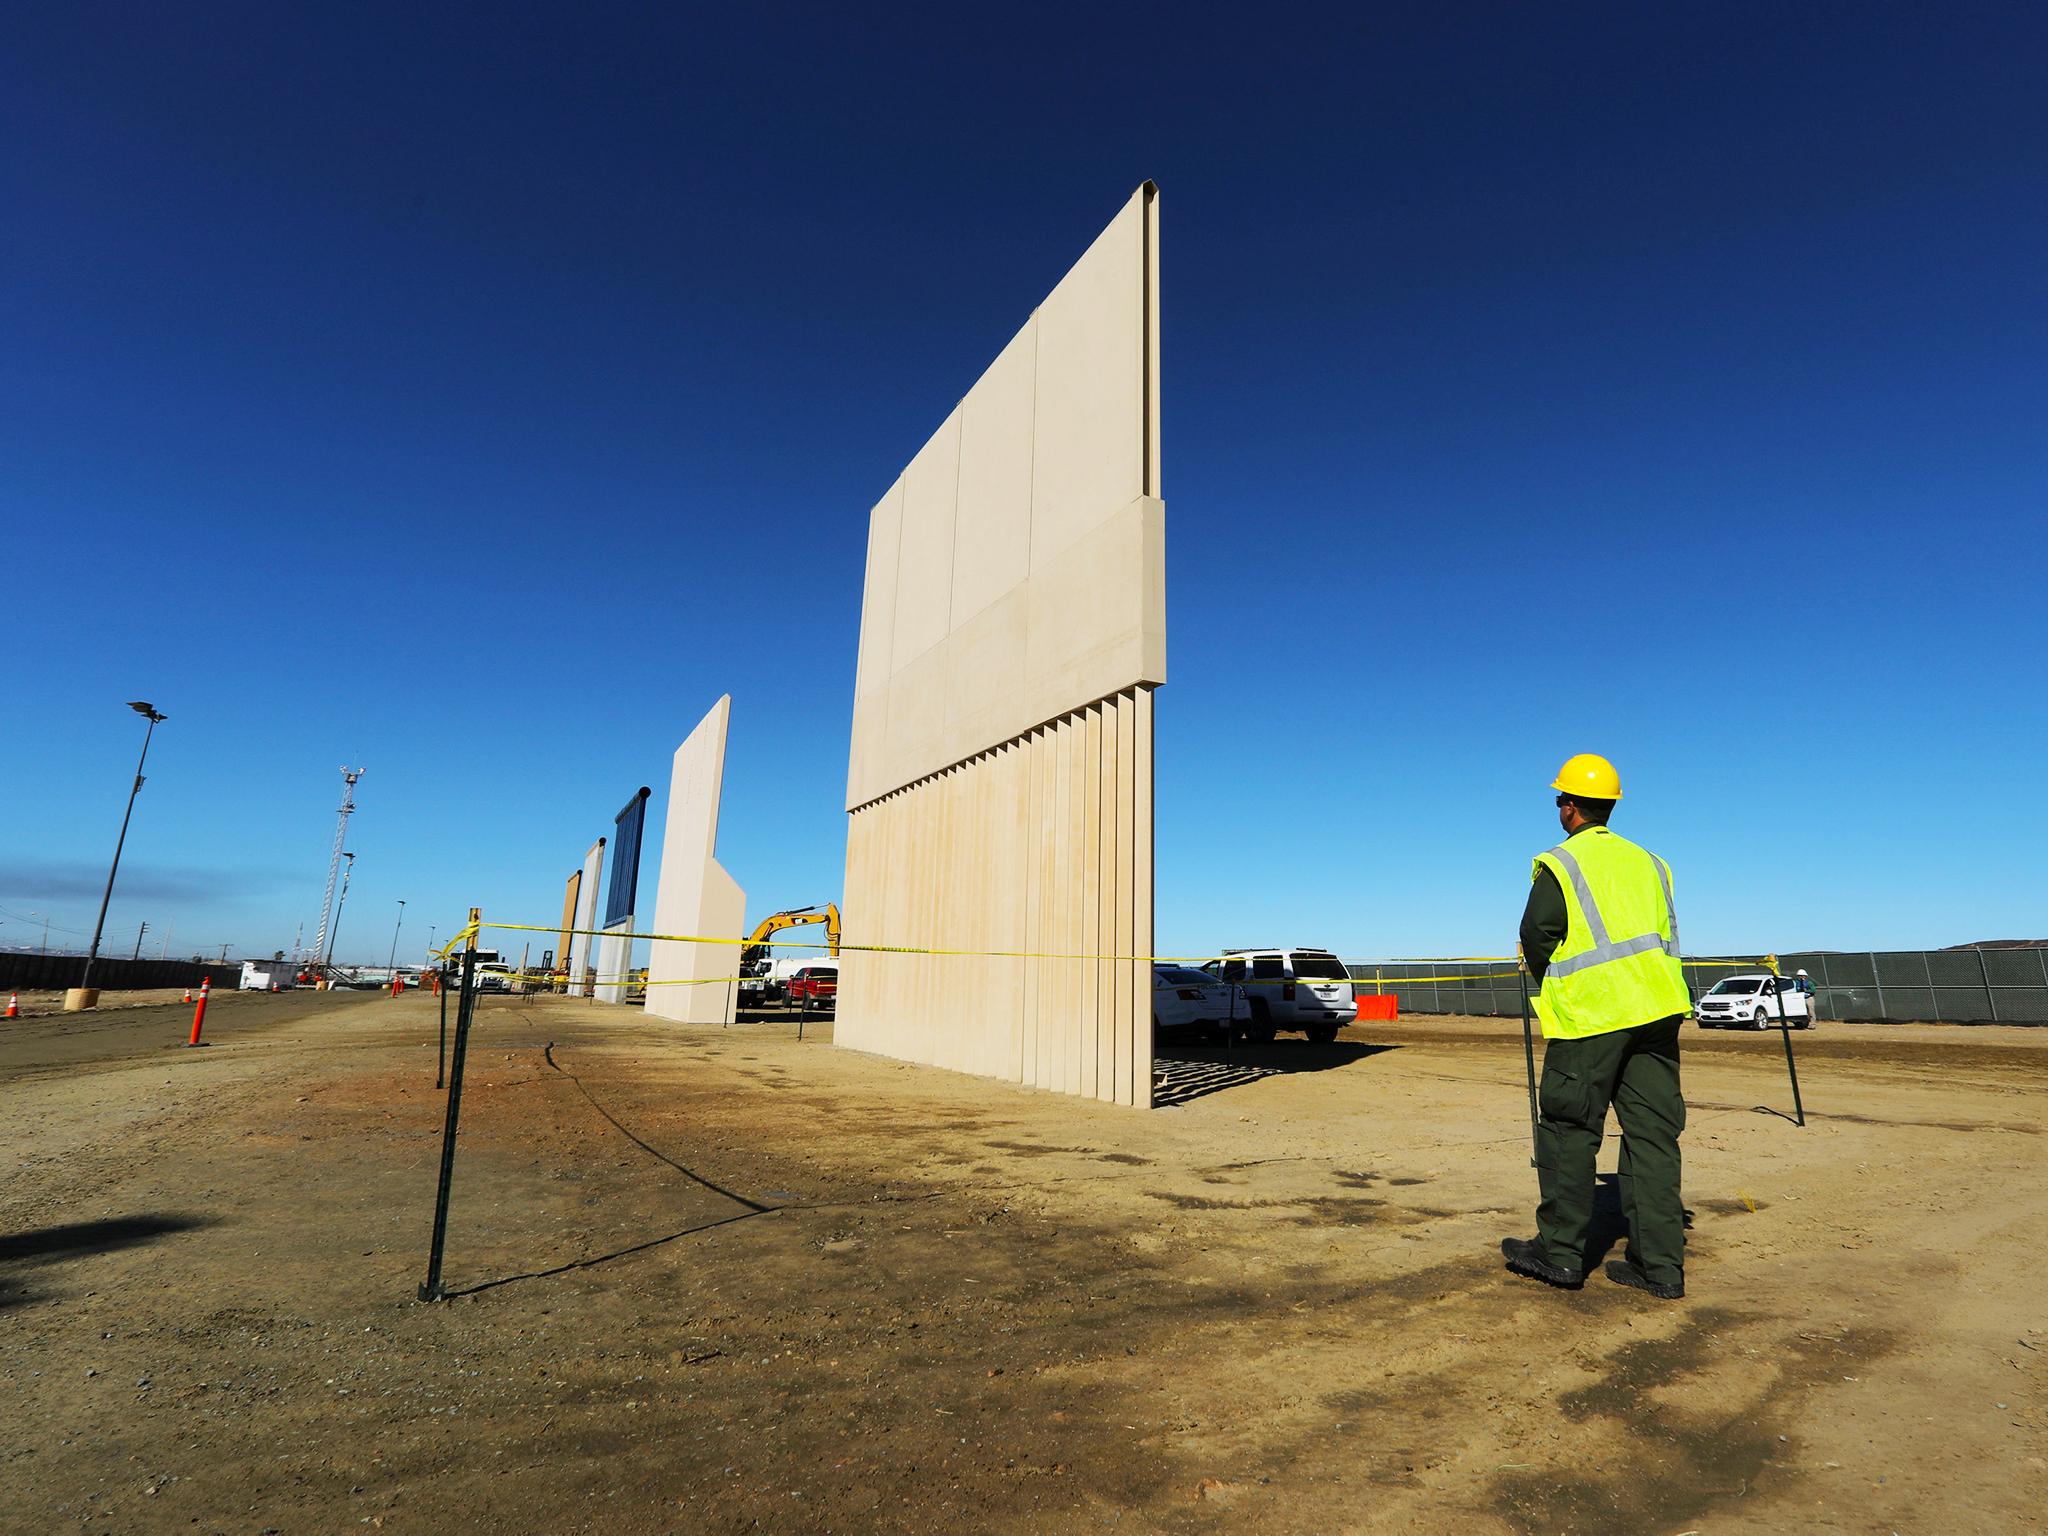 Border wall prototypes are shown near completion along the US-Mexico border in San Diego